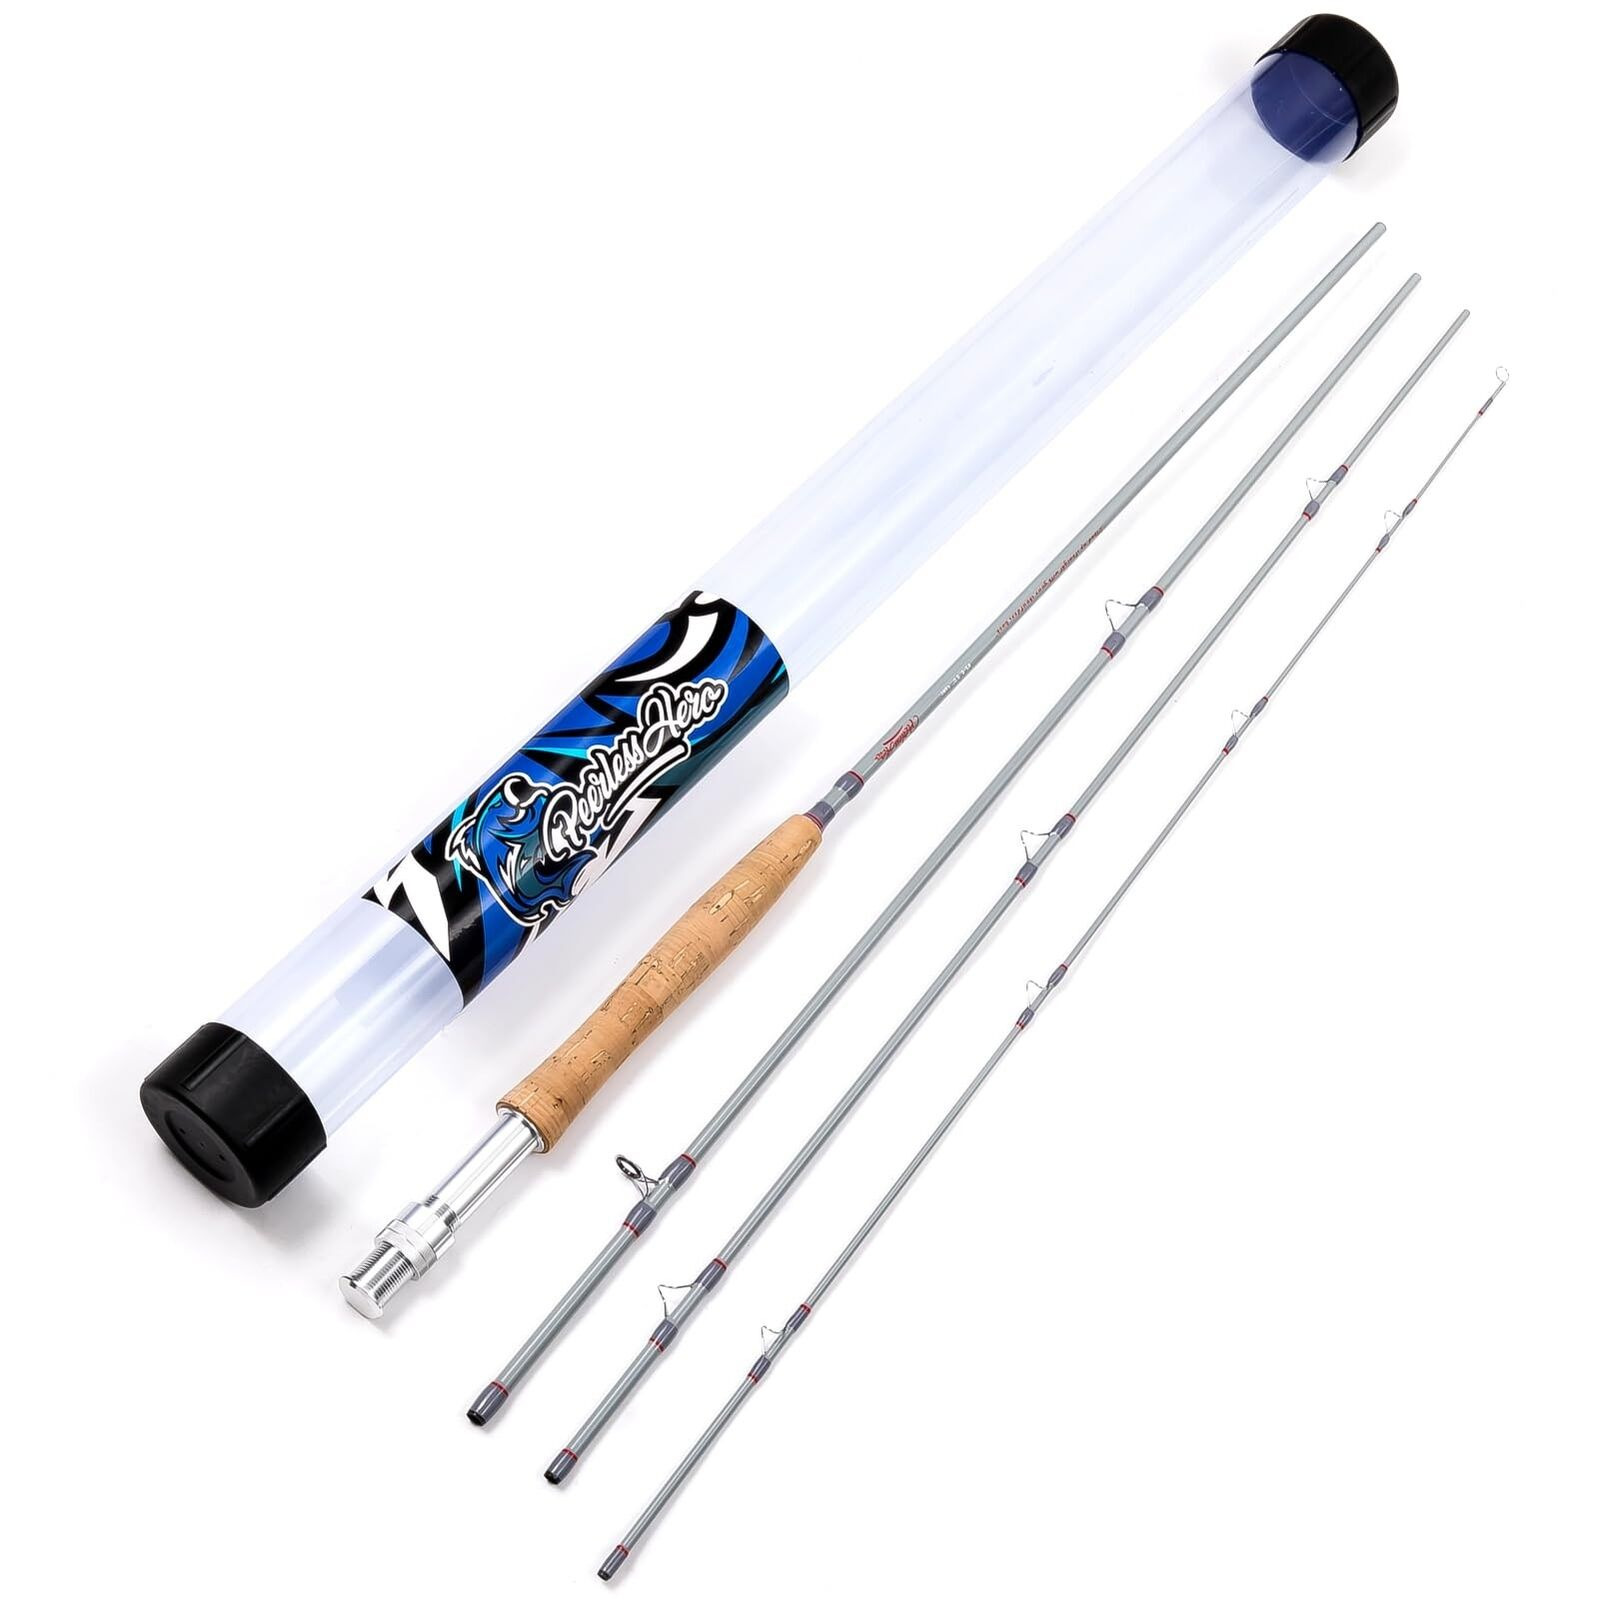 Fly Fishing Rod 4-Piece 9 Feet with IM6 Carbon Blank, Hard Chromed Guides, a ...